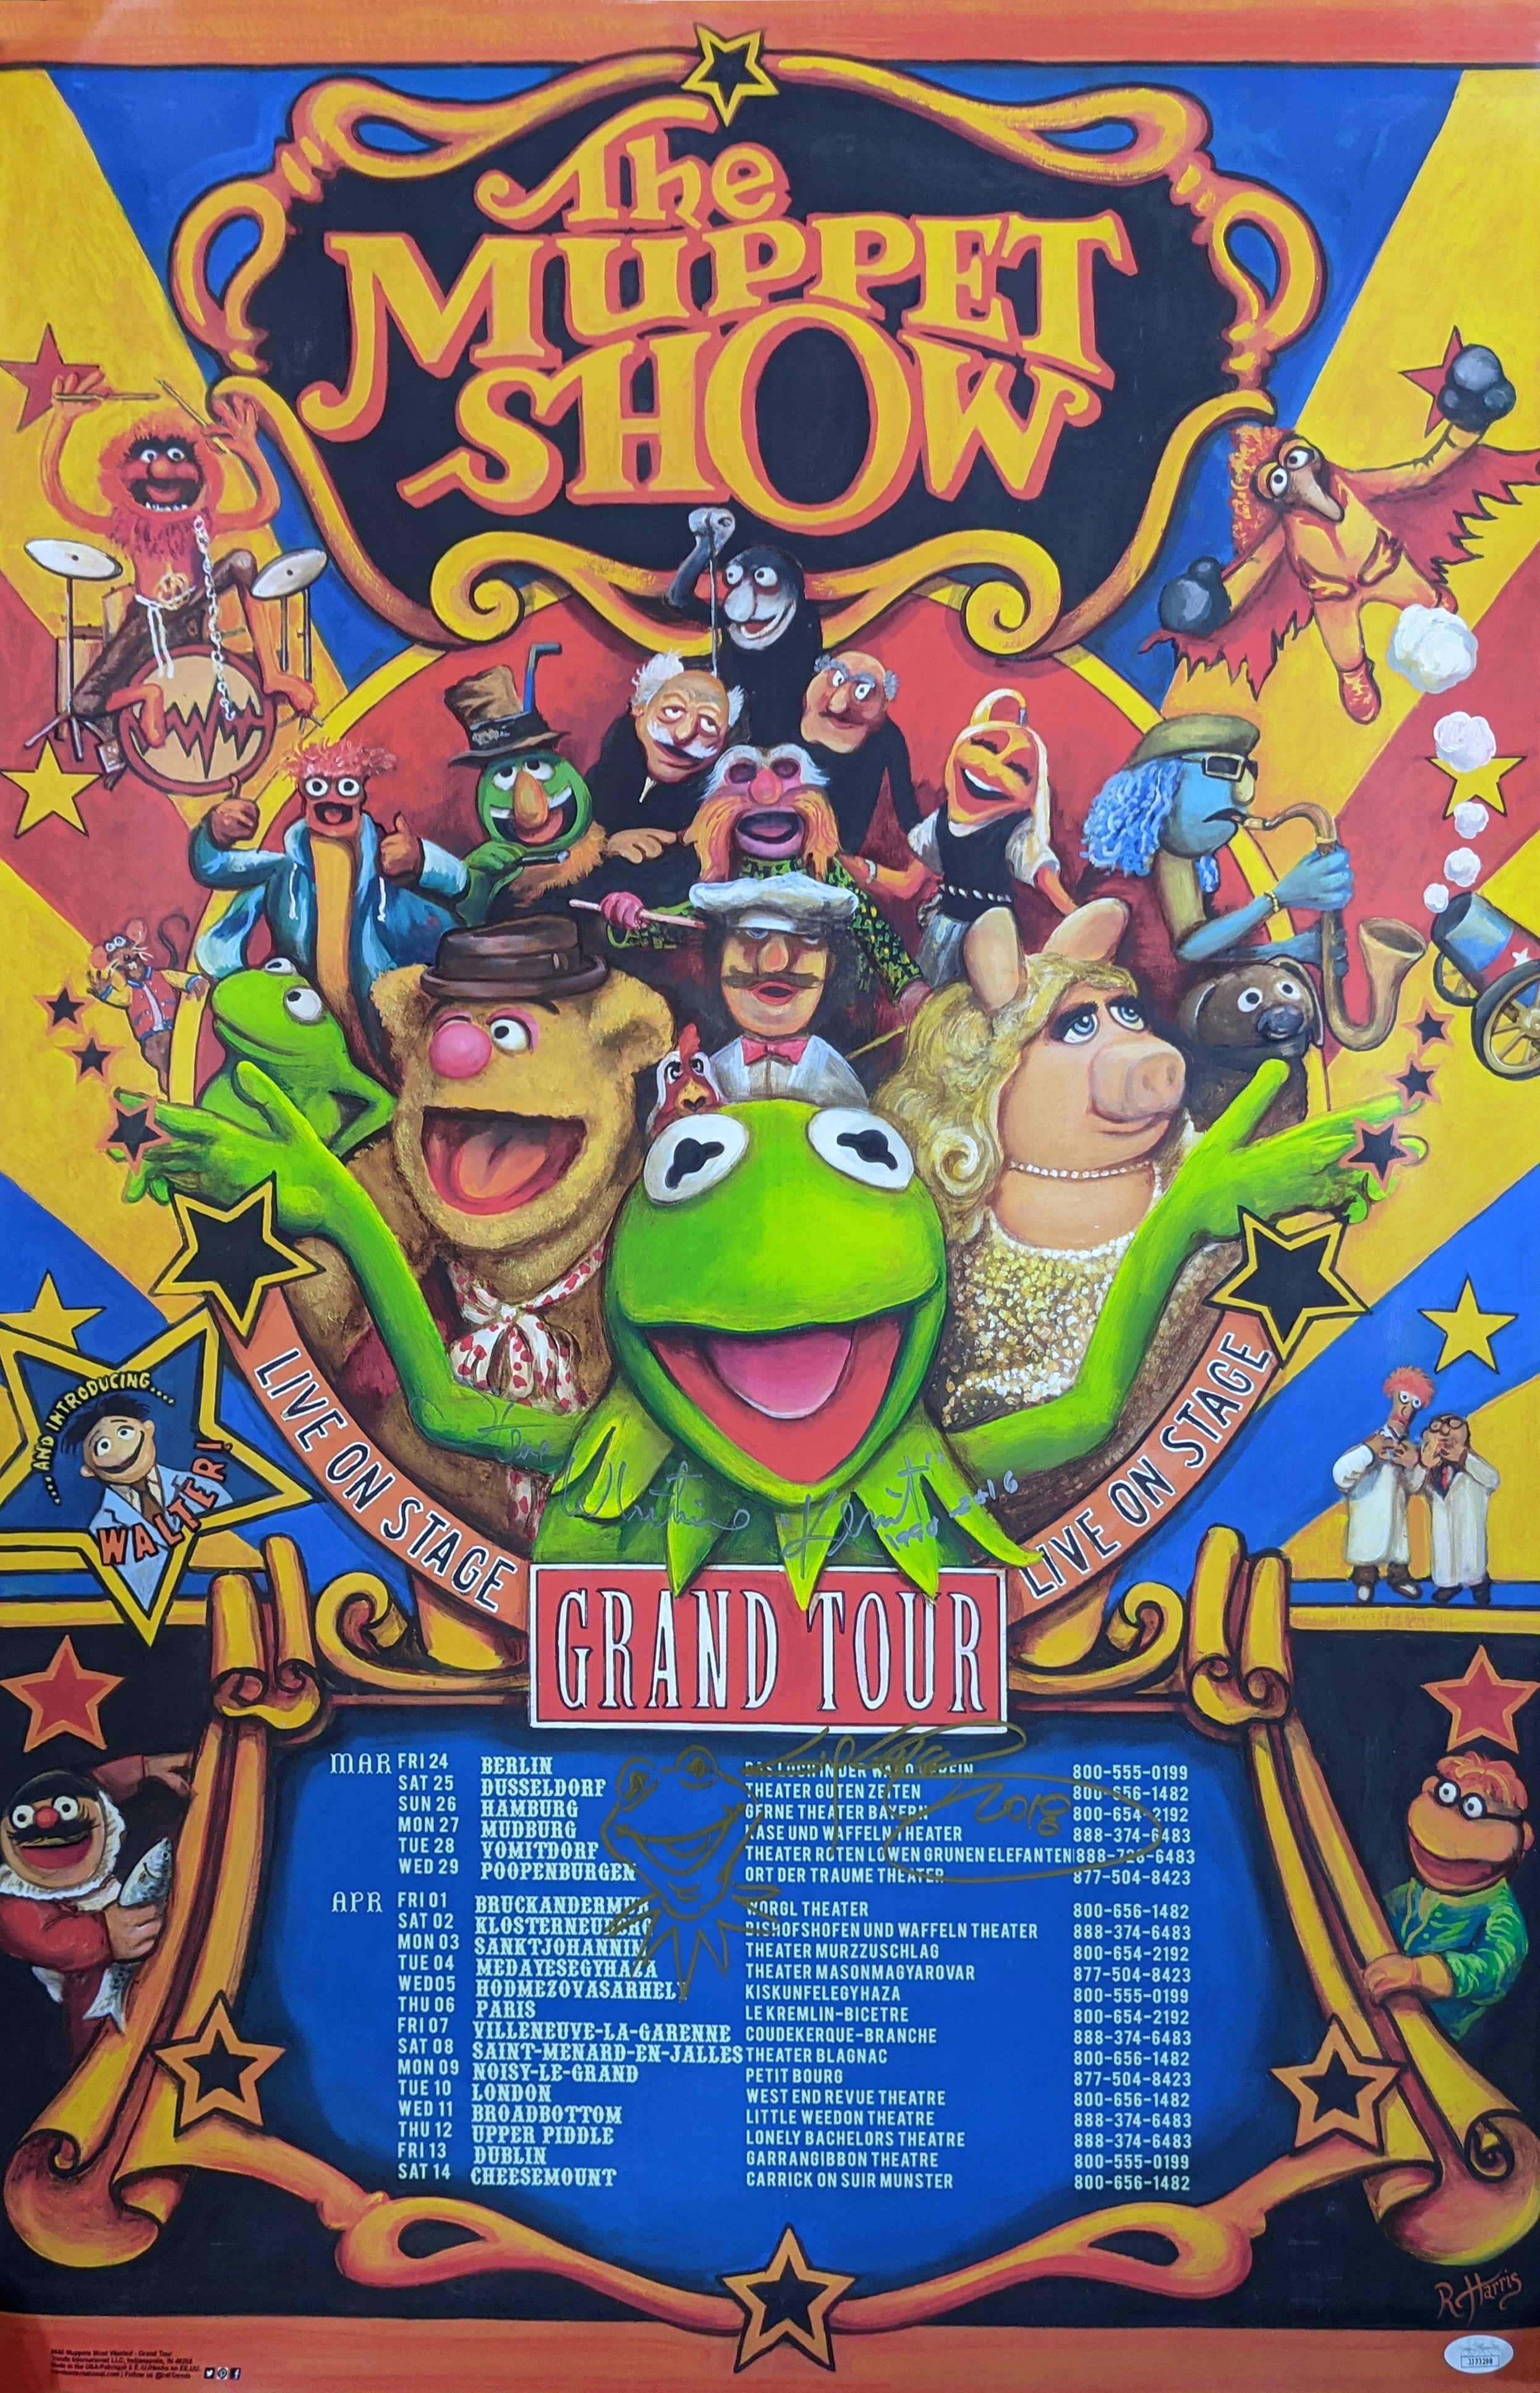 The Muppet Show 22x34 Poster Signed Autograph Whitmire Gilchrist JSA Certified COA Auto